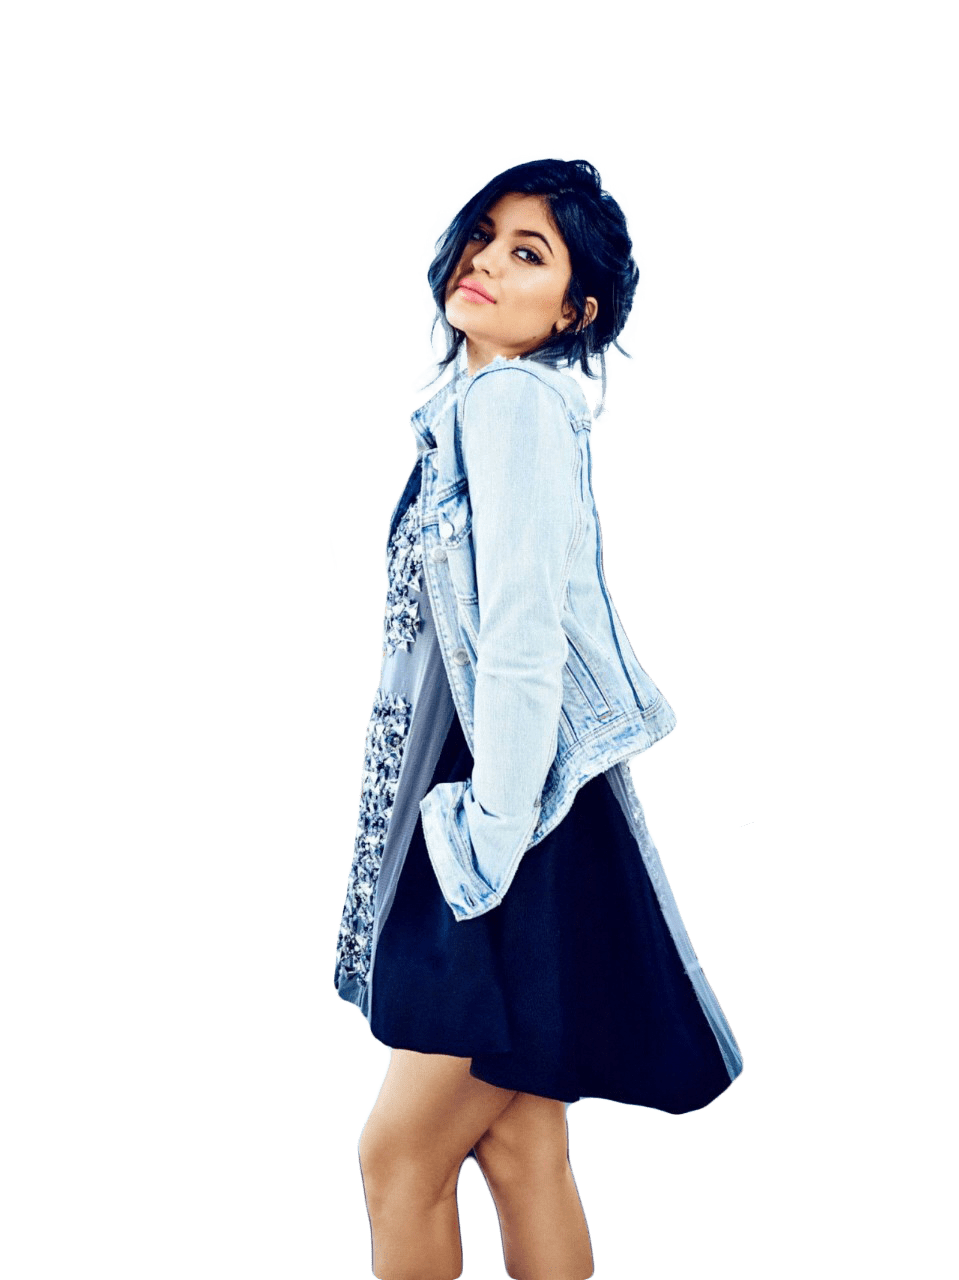 Kylie Jenner Sideview PNG Image